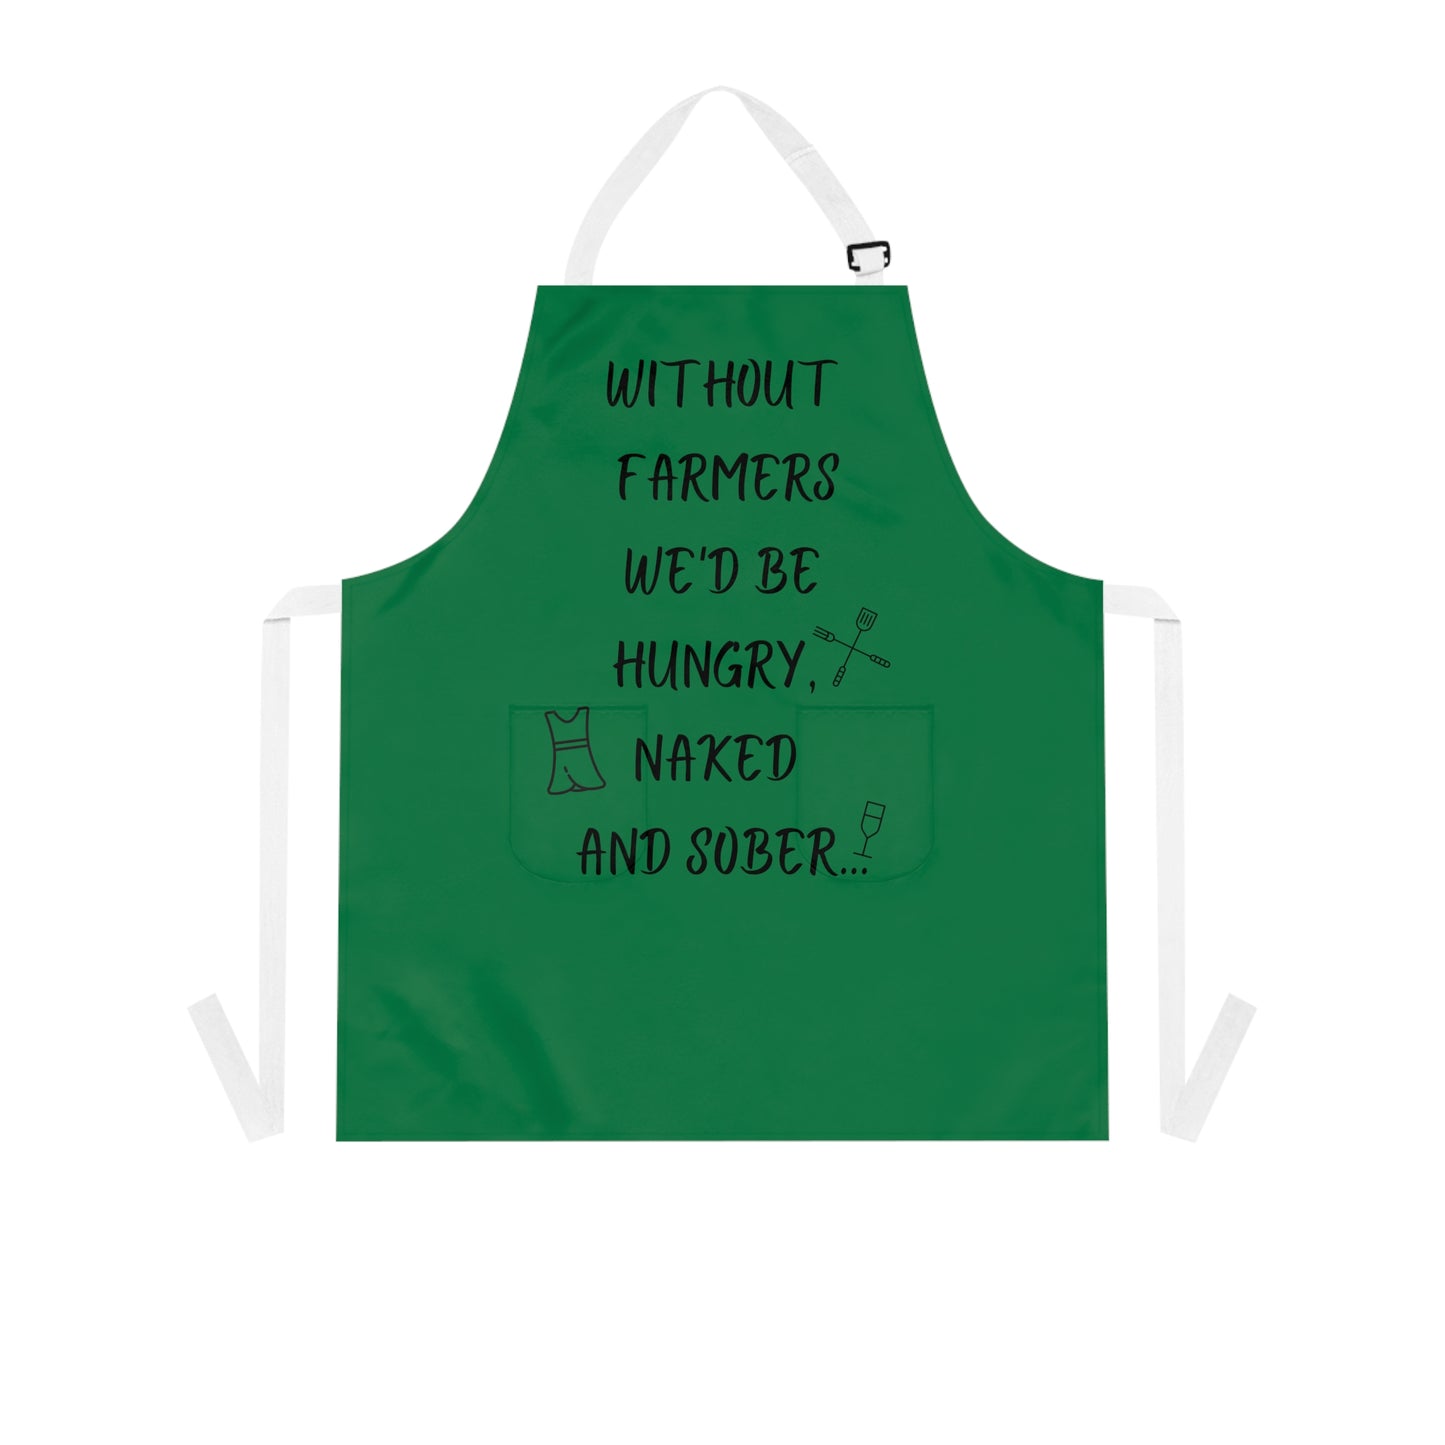 green kitchen apron with logo without farmers we'd be hungry, naked and sober